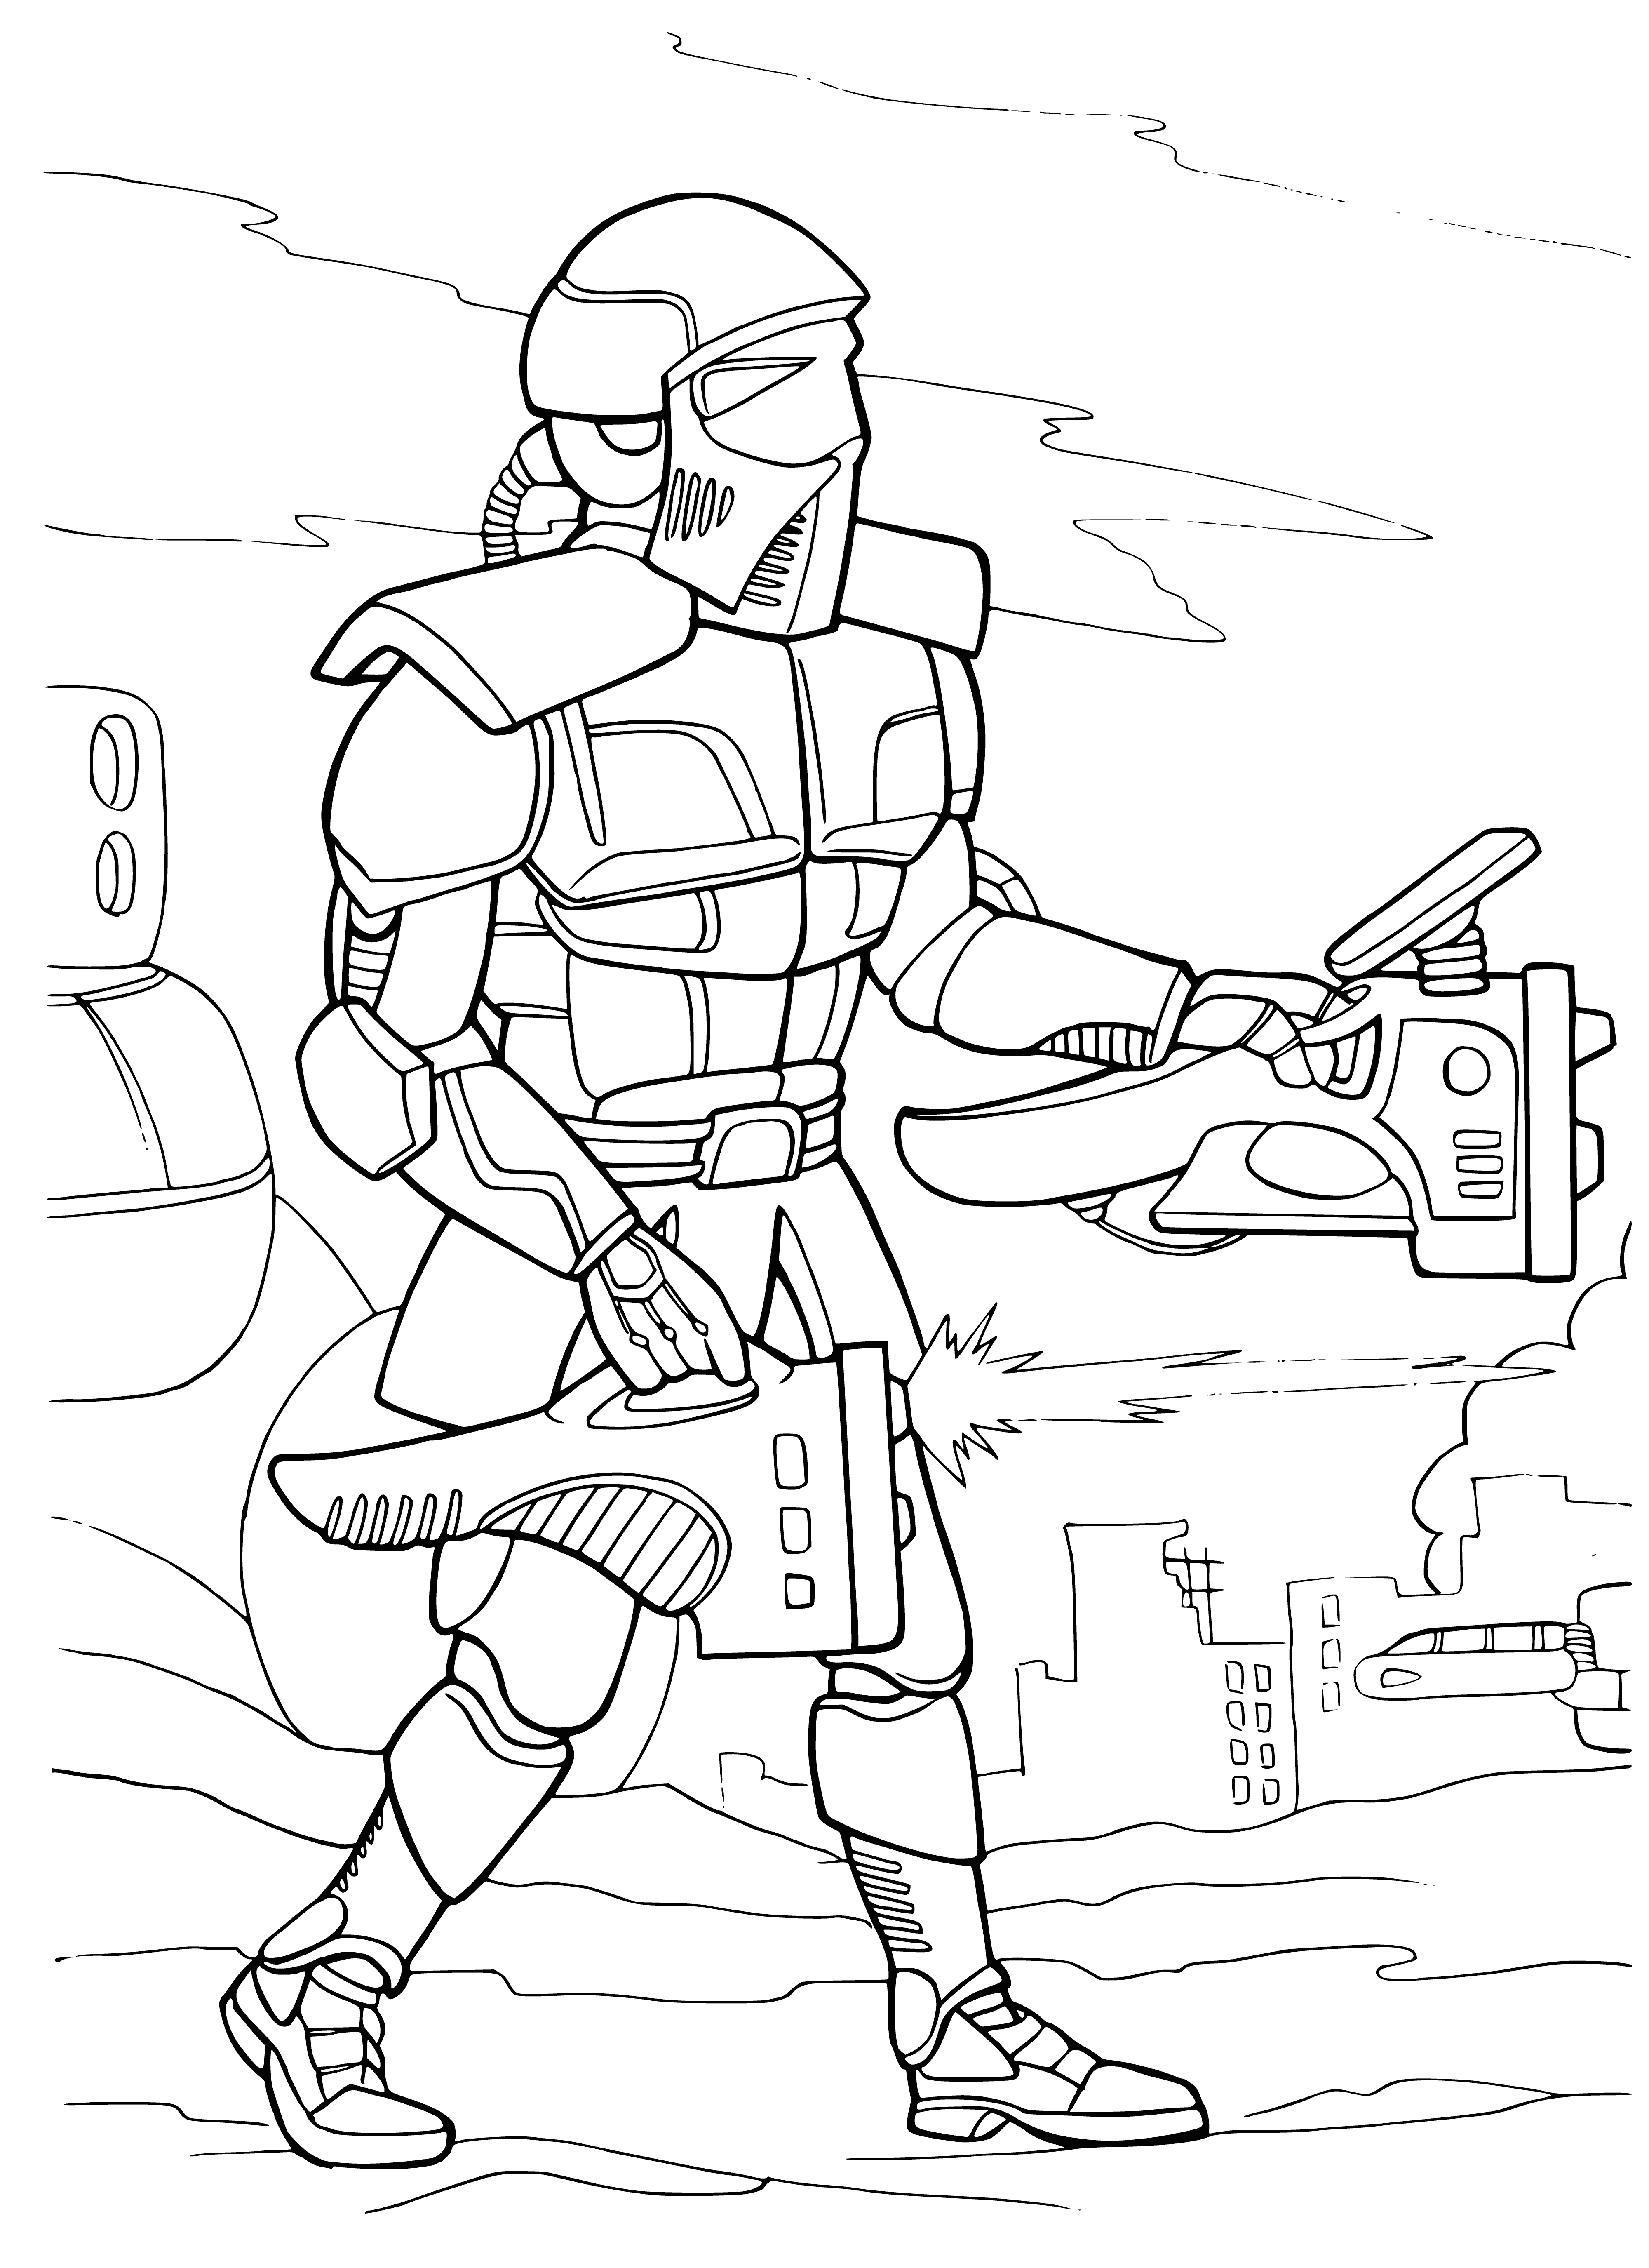 coloring page: Future wars fought with battle androids equipped with powerful weapons & armor, proving effective in combat.